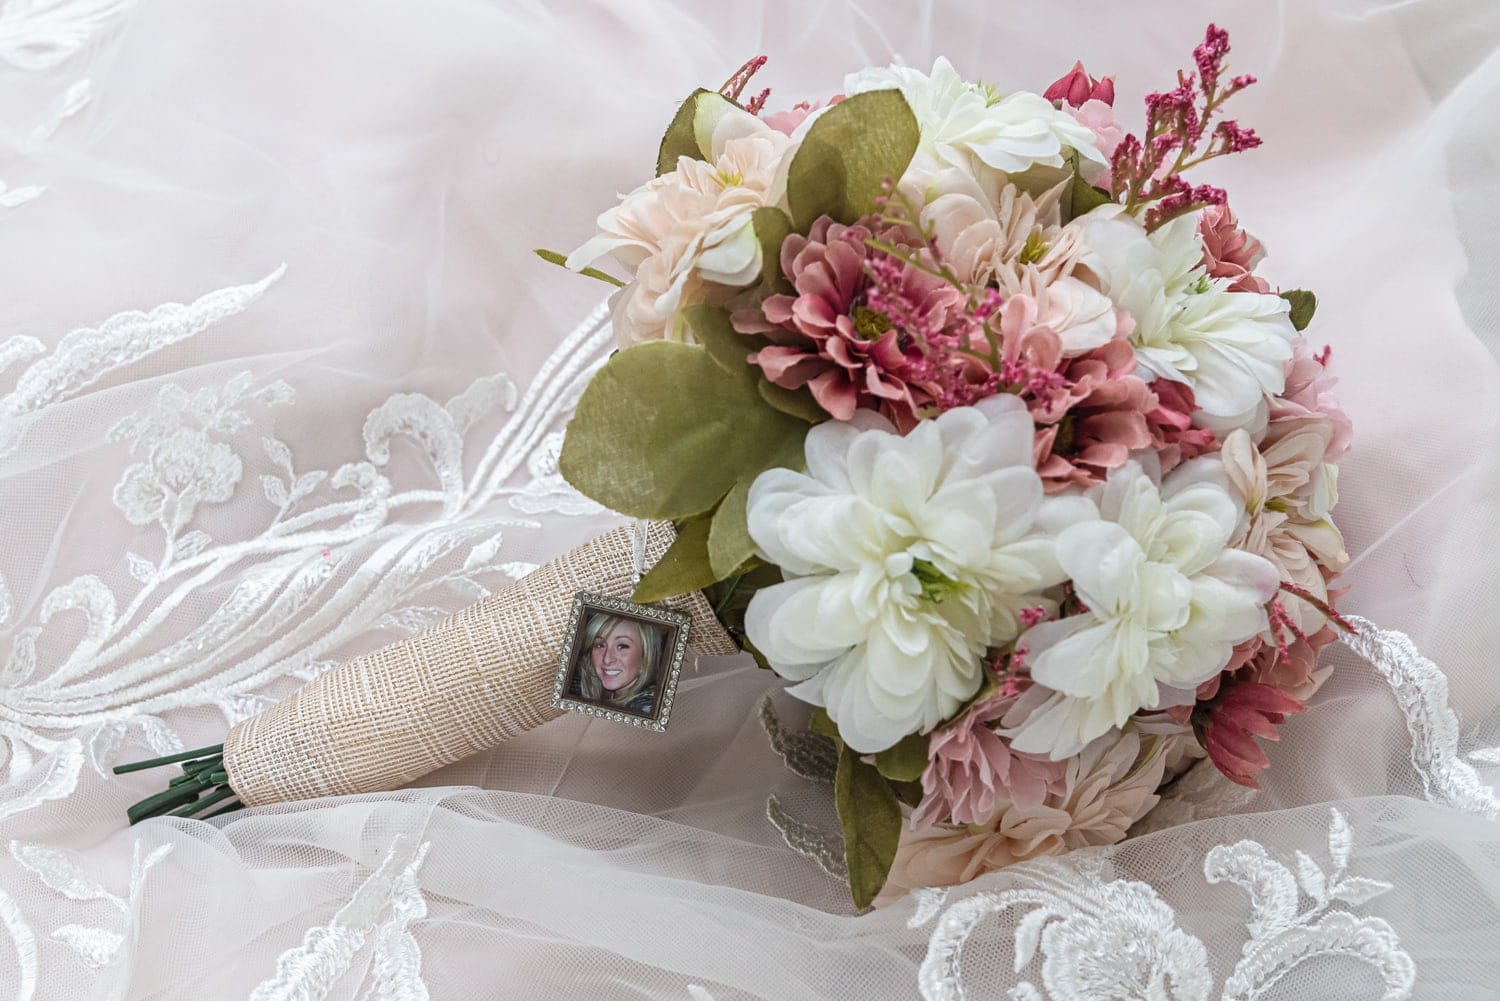 A silk flower arrangement of white, pink and green in a wedding bridal bouquet.